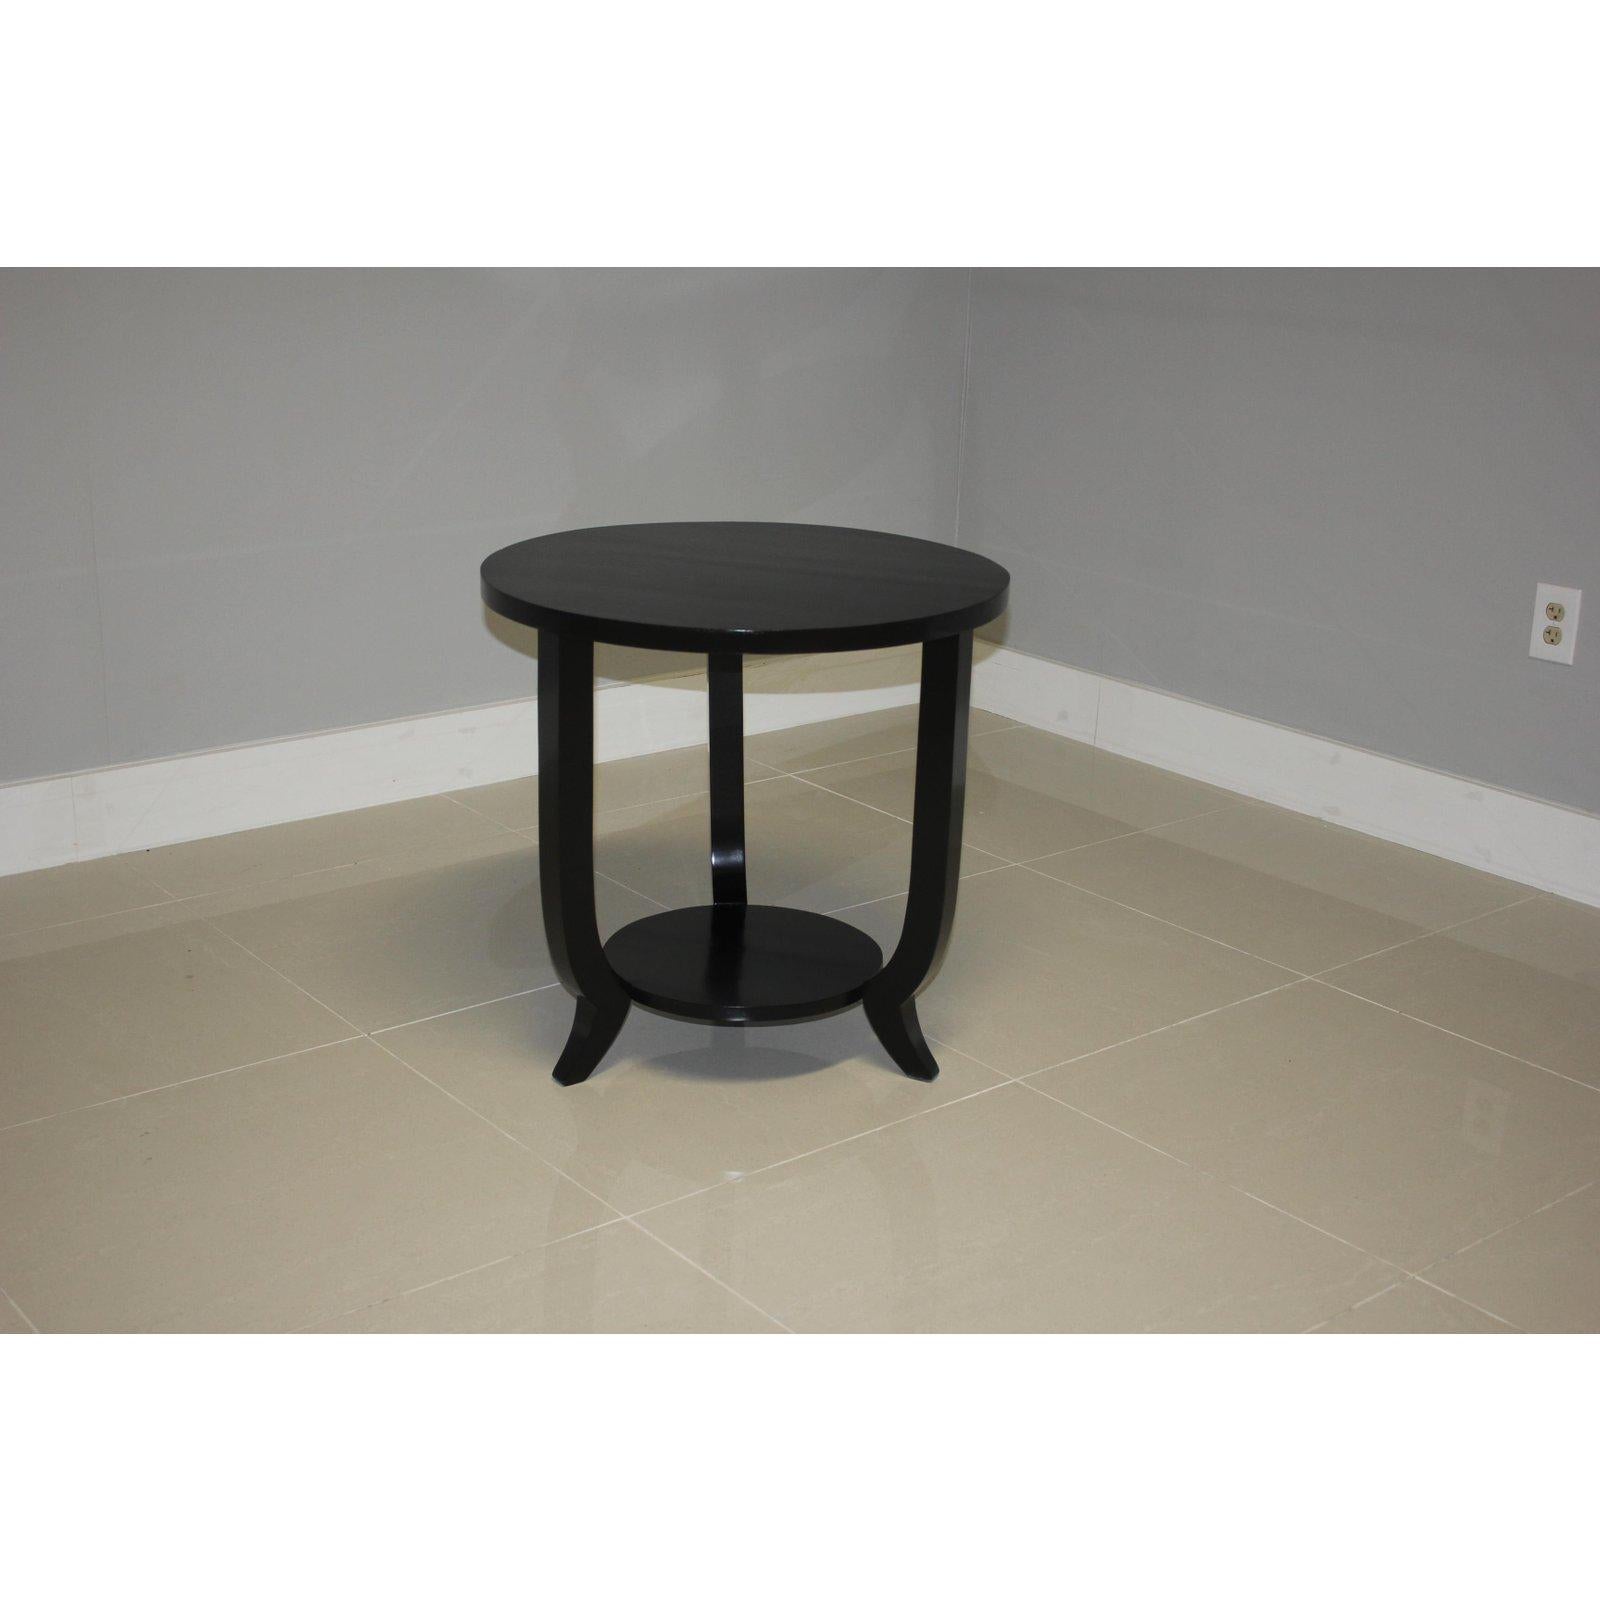 Mid-20th Century French Art Deco Black Ebonized Side Table or End Table, 1940s